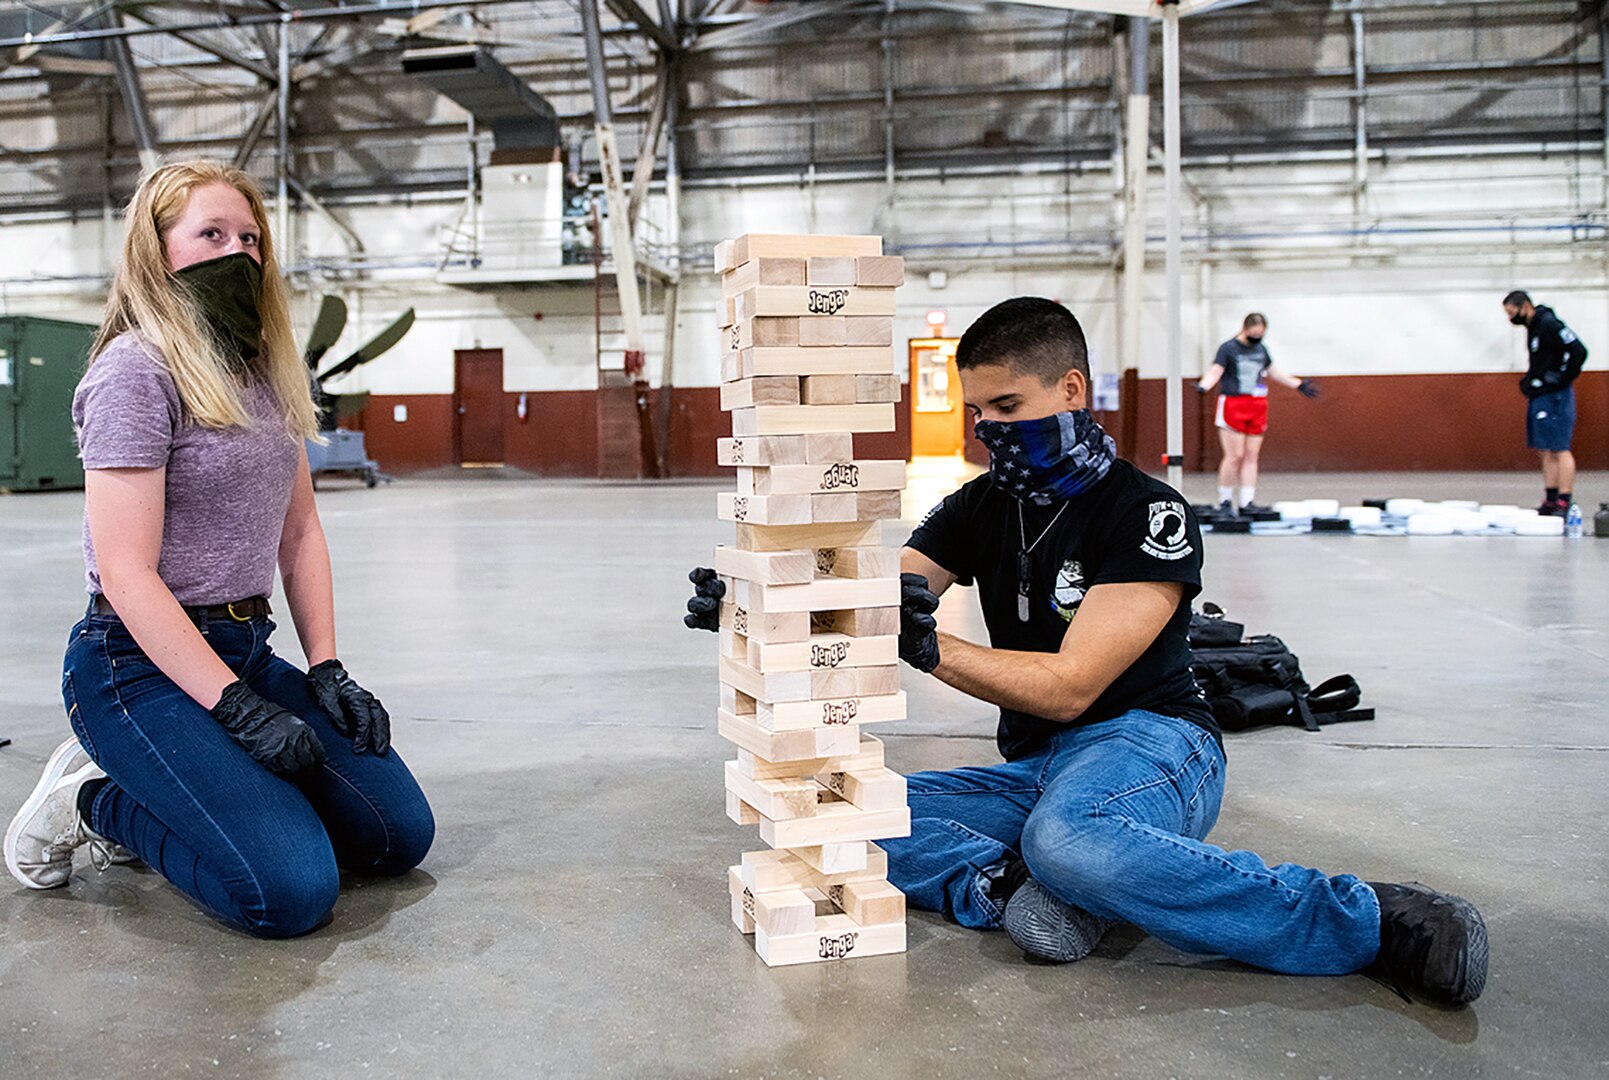 U.S. Air Force Airman Basic Cali Mason (left) and Airman Basic Harry Torres-Guzman (right), both with the 343rd Security Forces Squadron, Joint Base San Antonio-Lackland, play a game during movie and game night Oct. 9 at JBSA-Kelly Field Annex.